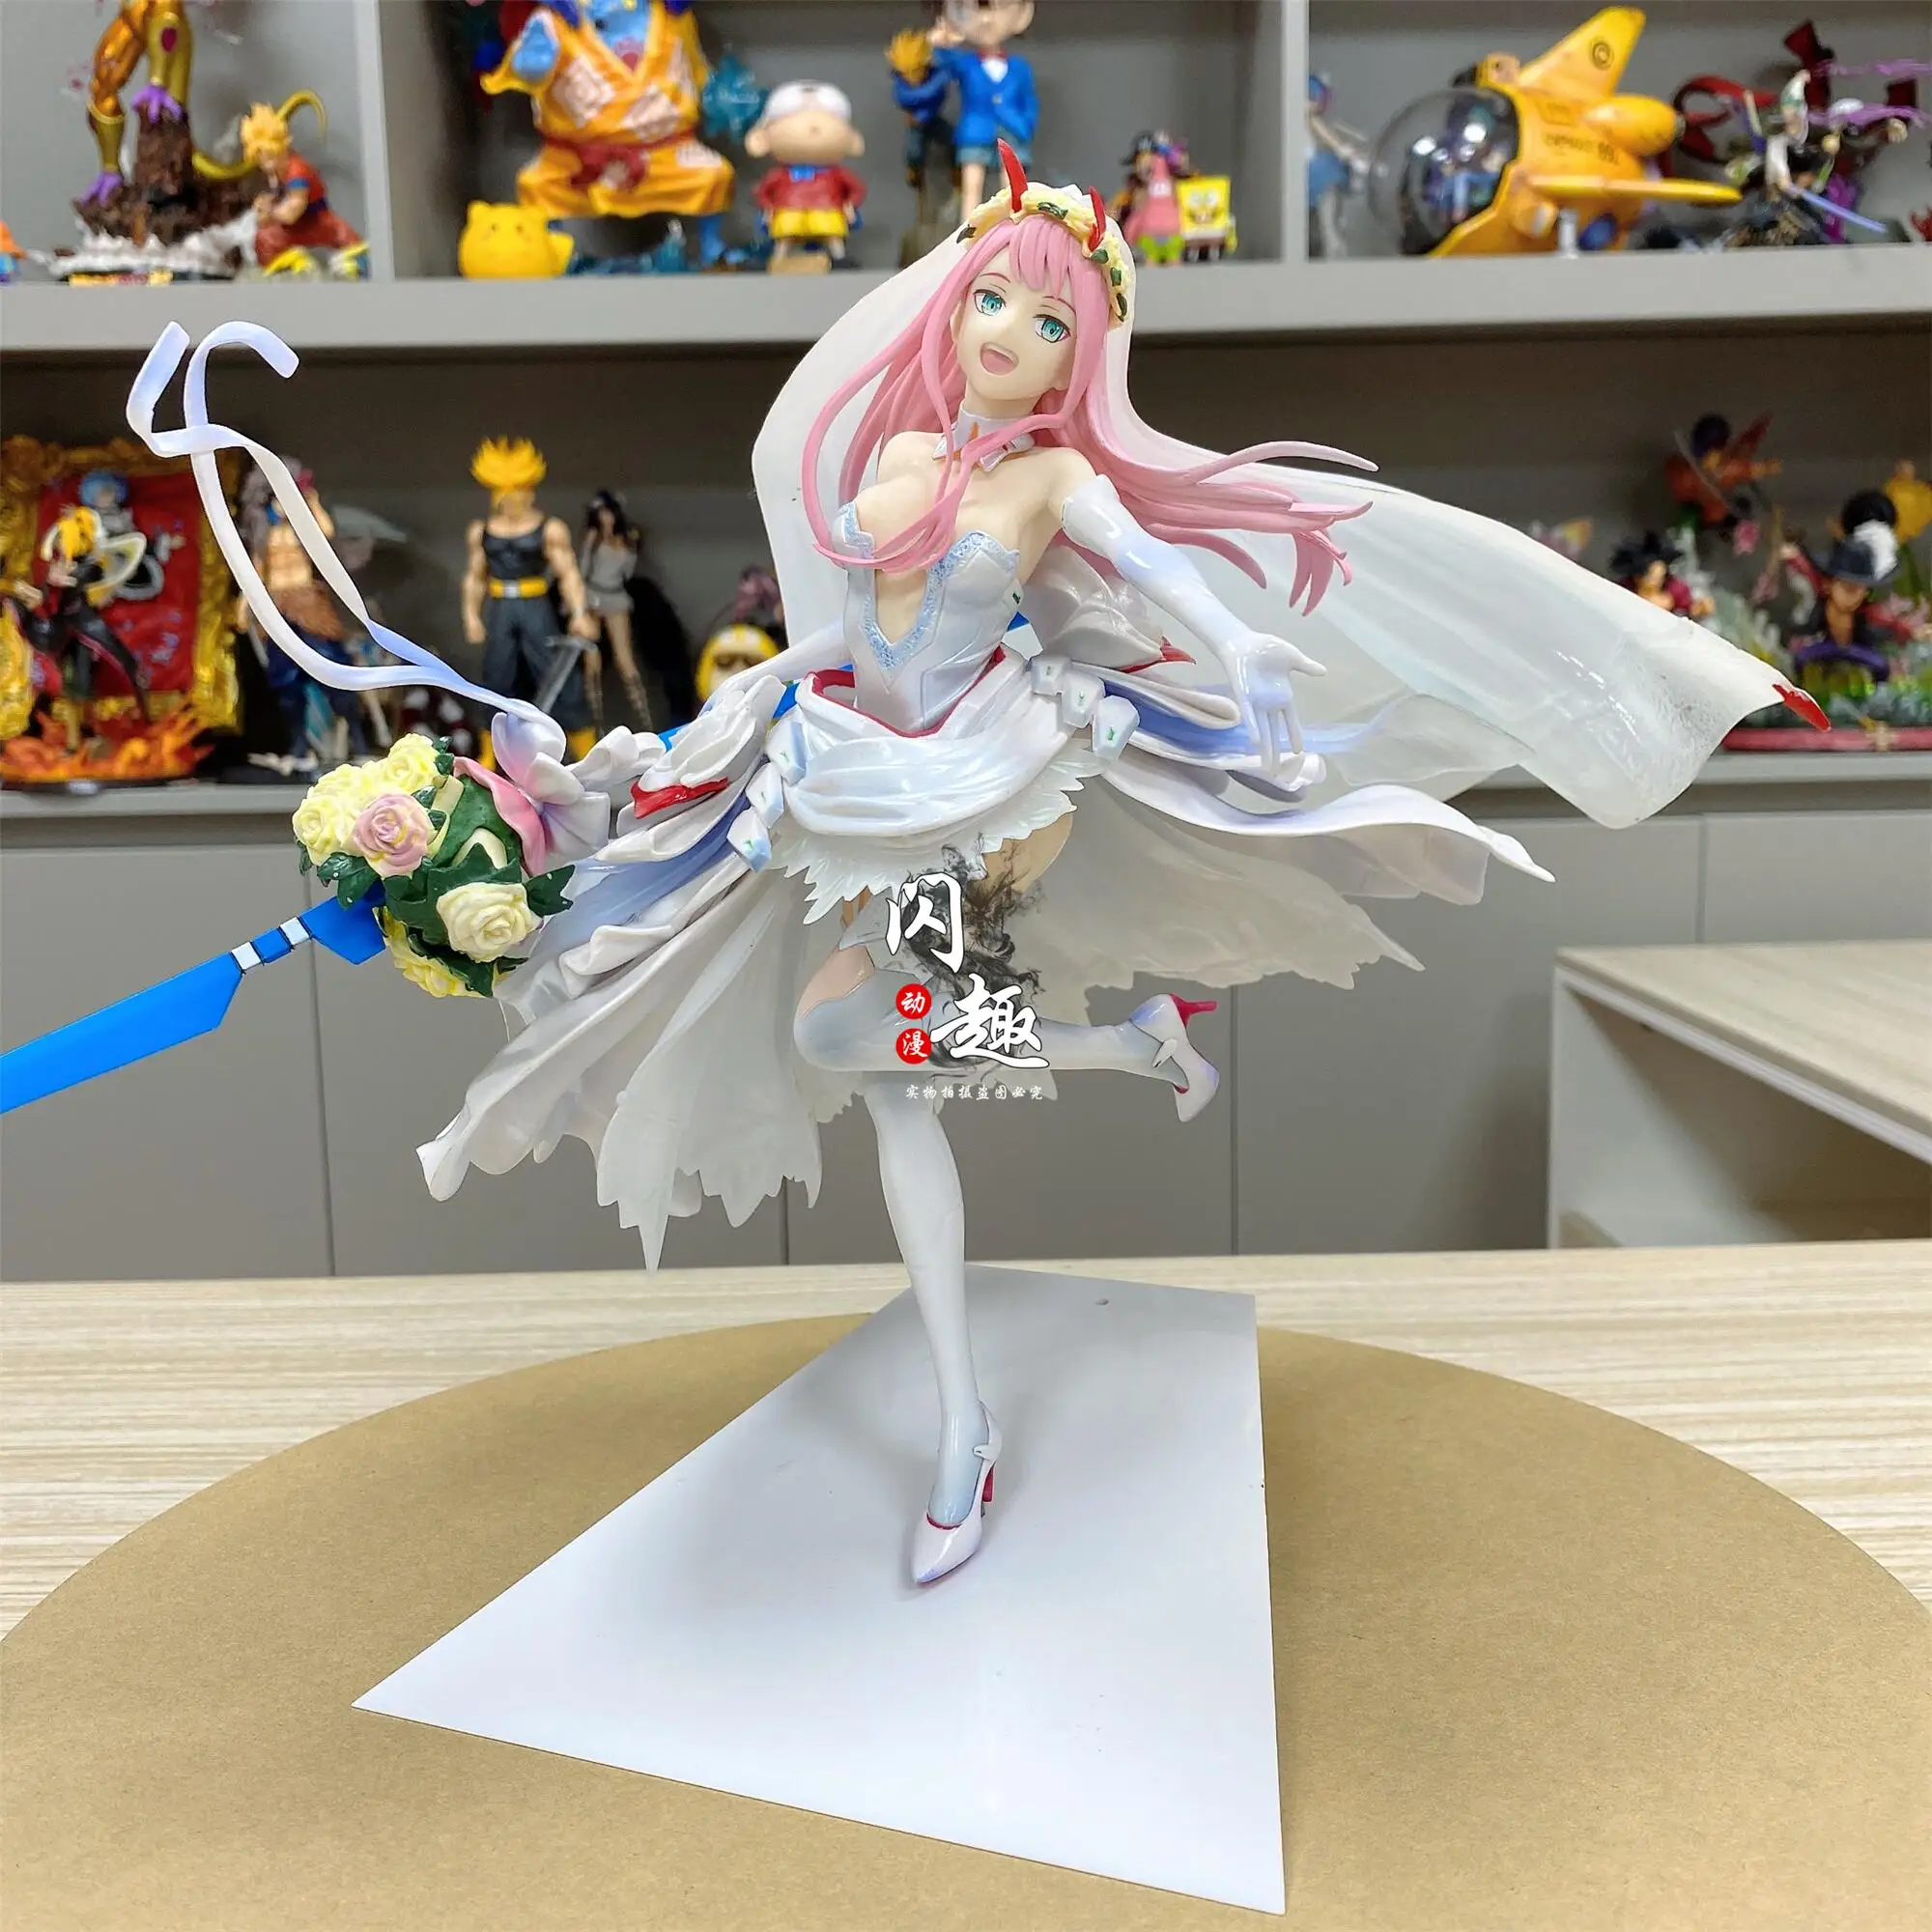 

27cm DARLING in the FRANXX Zero Two 02 Sexy Girl Anime Figure Zero Two For My Darling Wedding Action Figure Adult Model Doll Toy